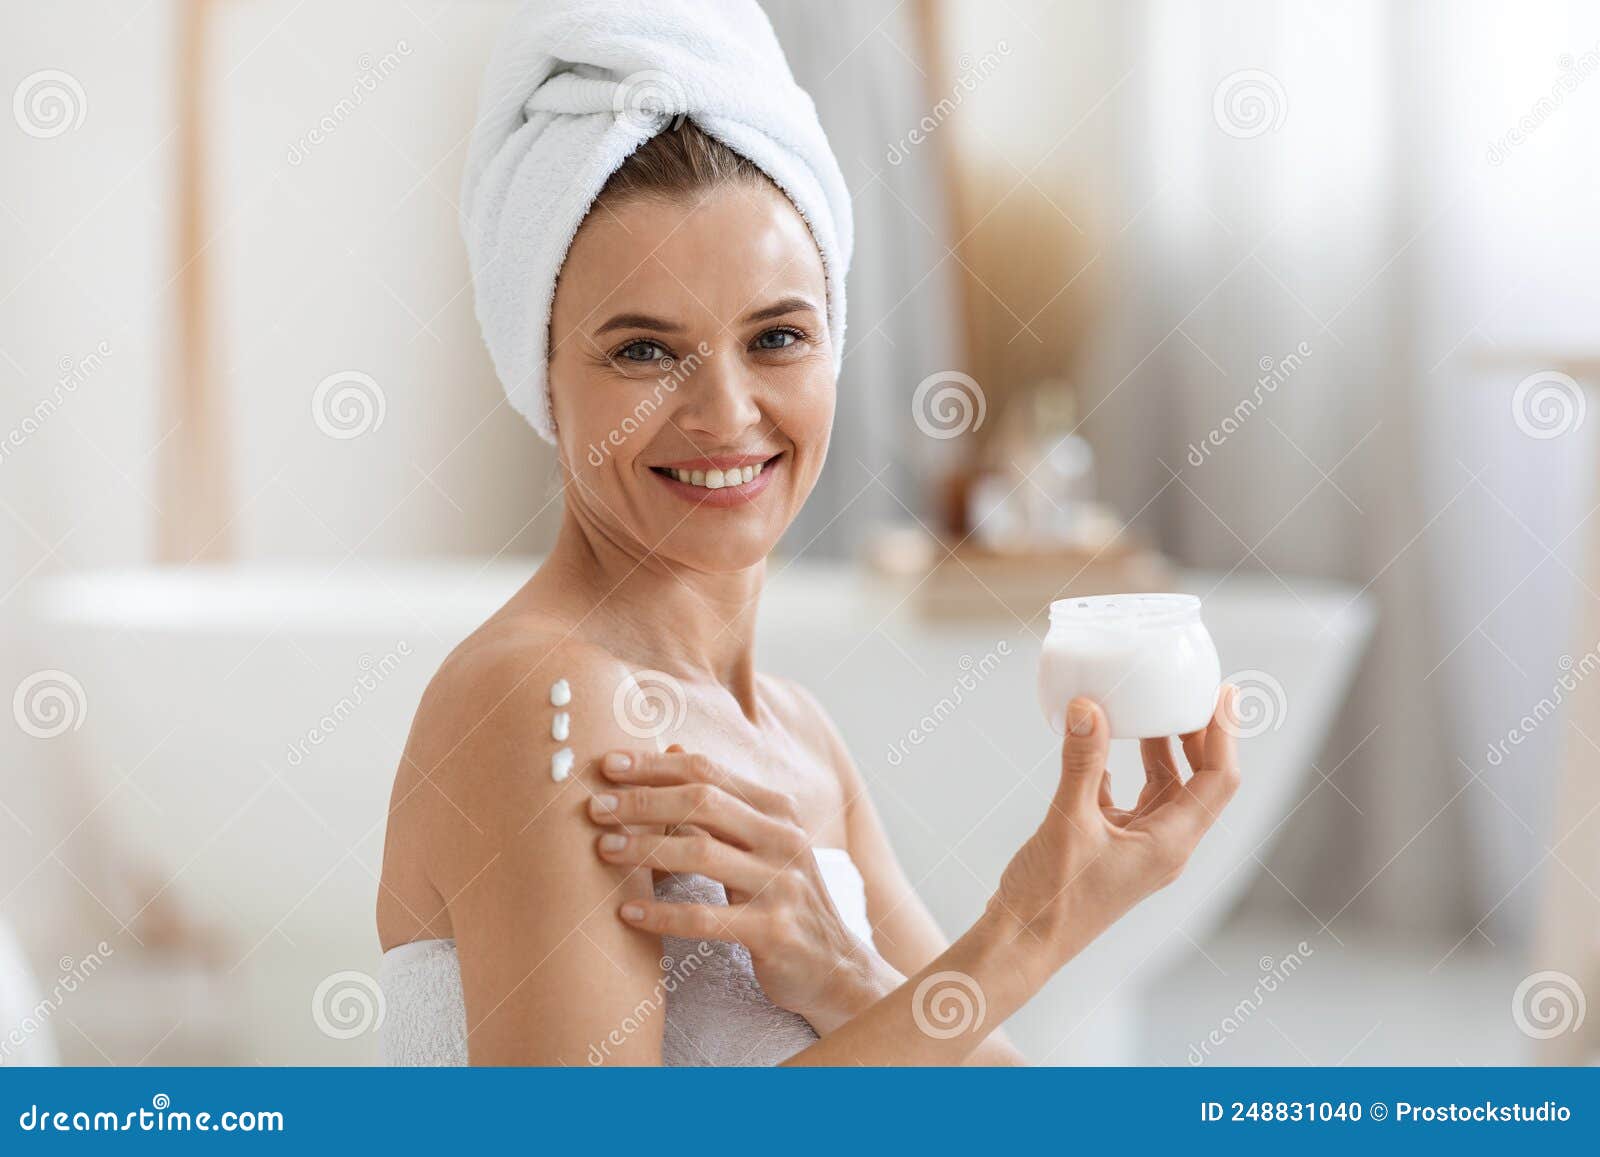 happy adult lady using body lotion after shower